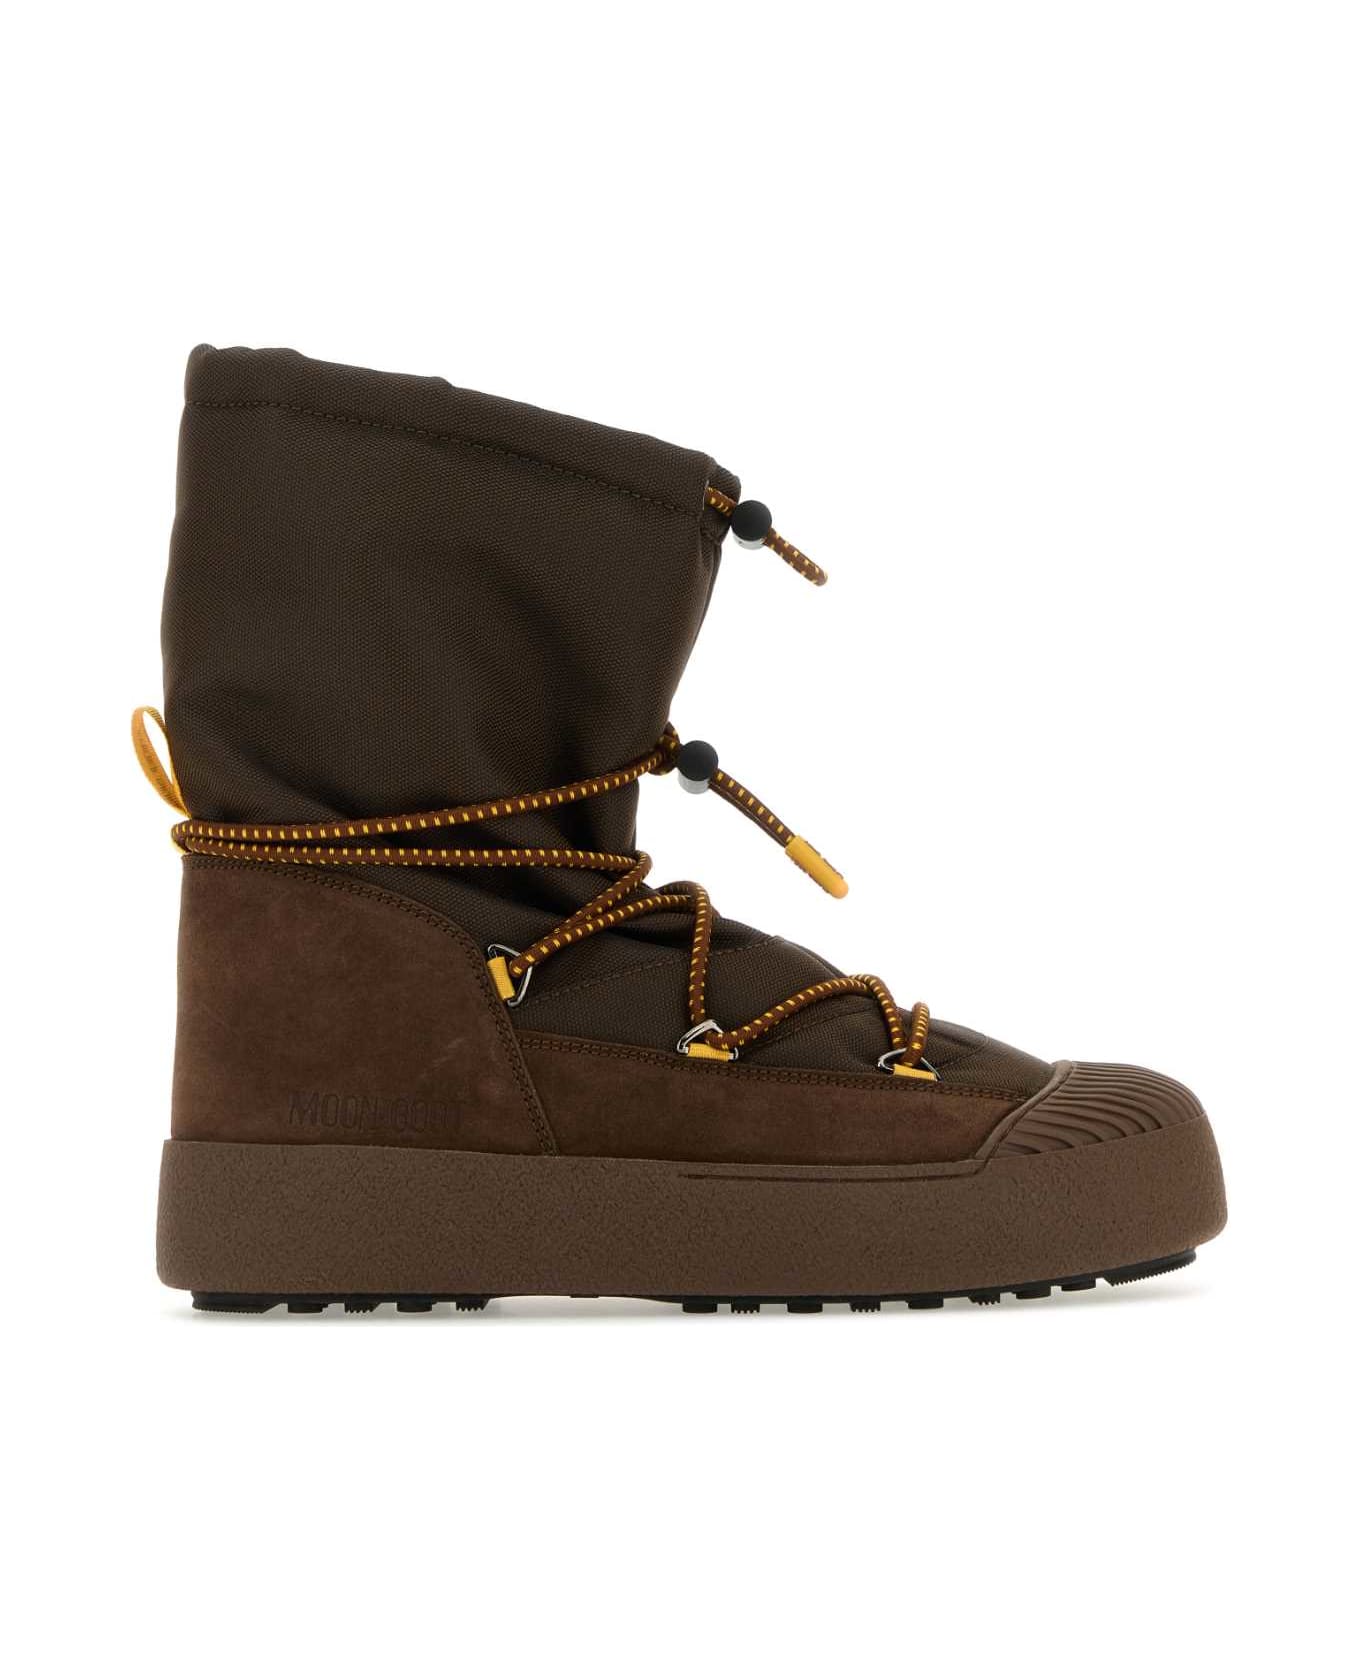 Moon Boot Brown Mtrack Polor Cordy Boots - BROWN